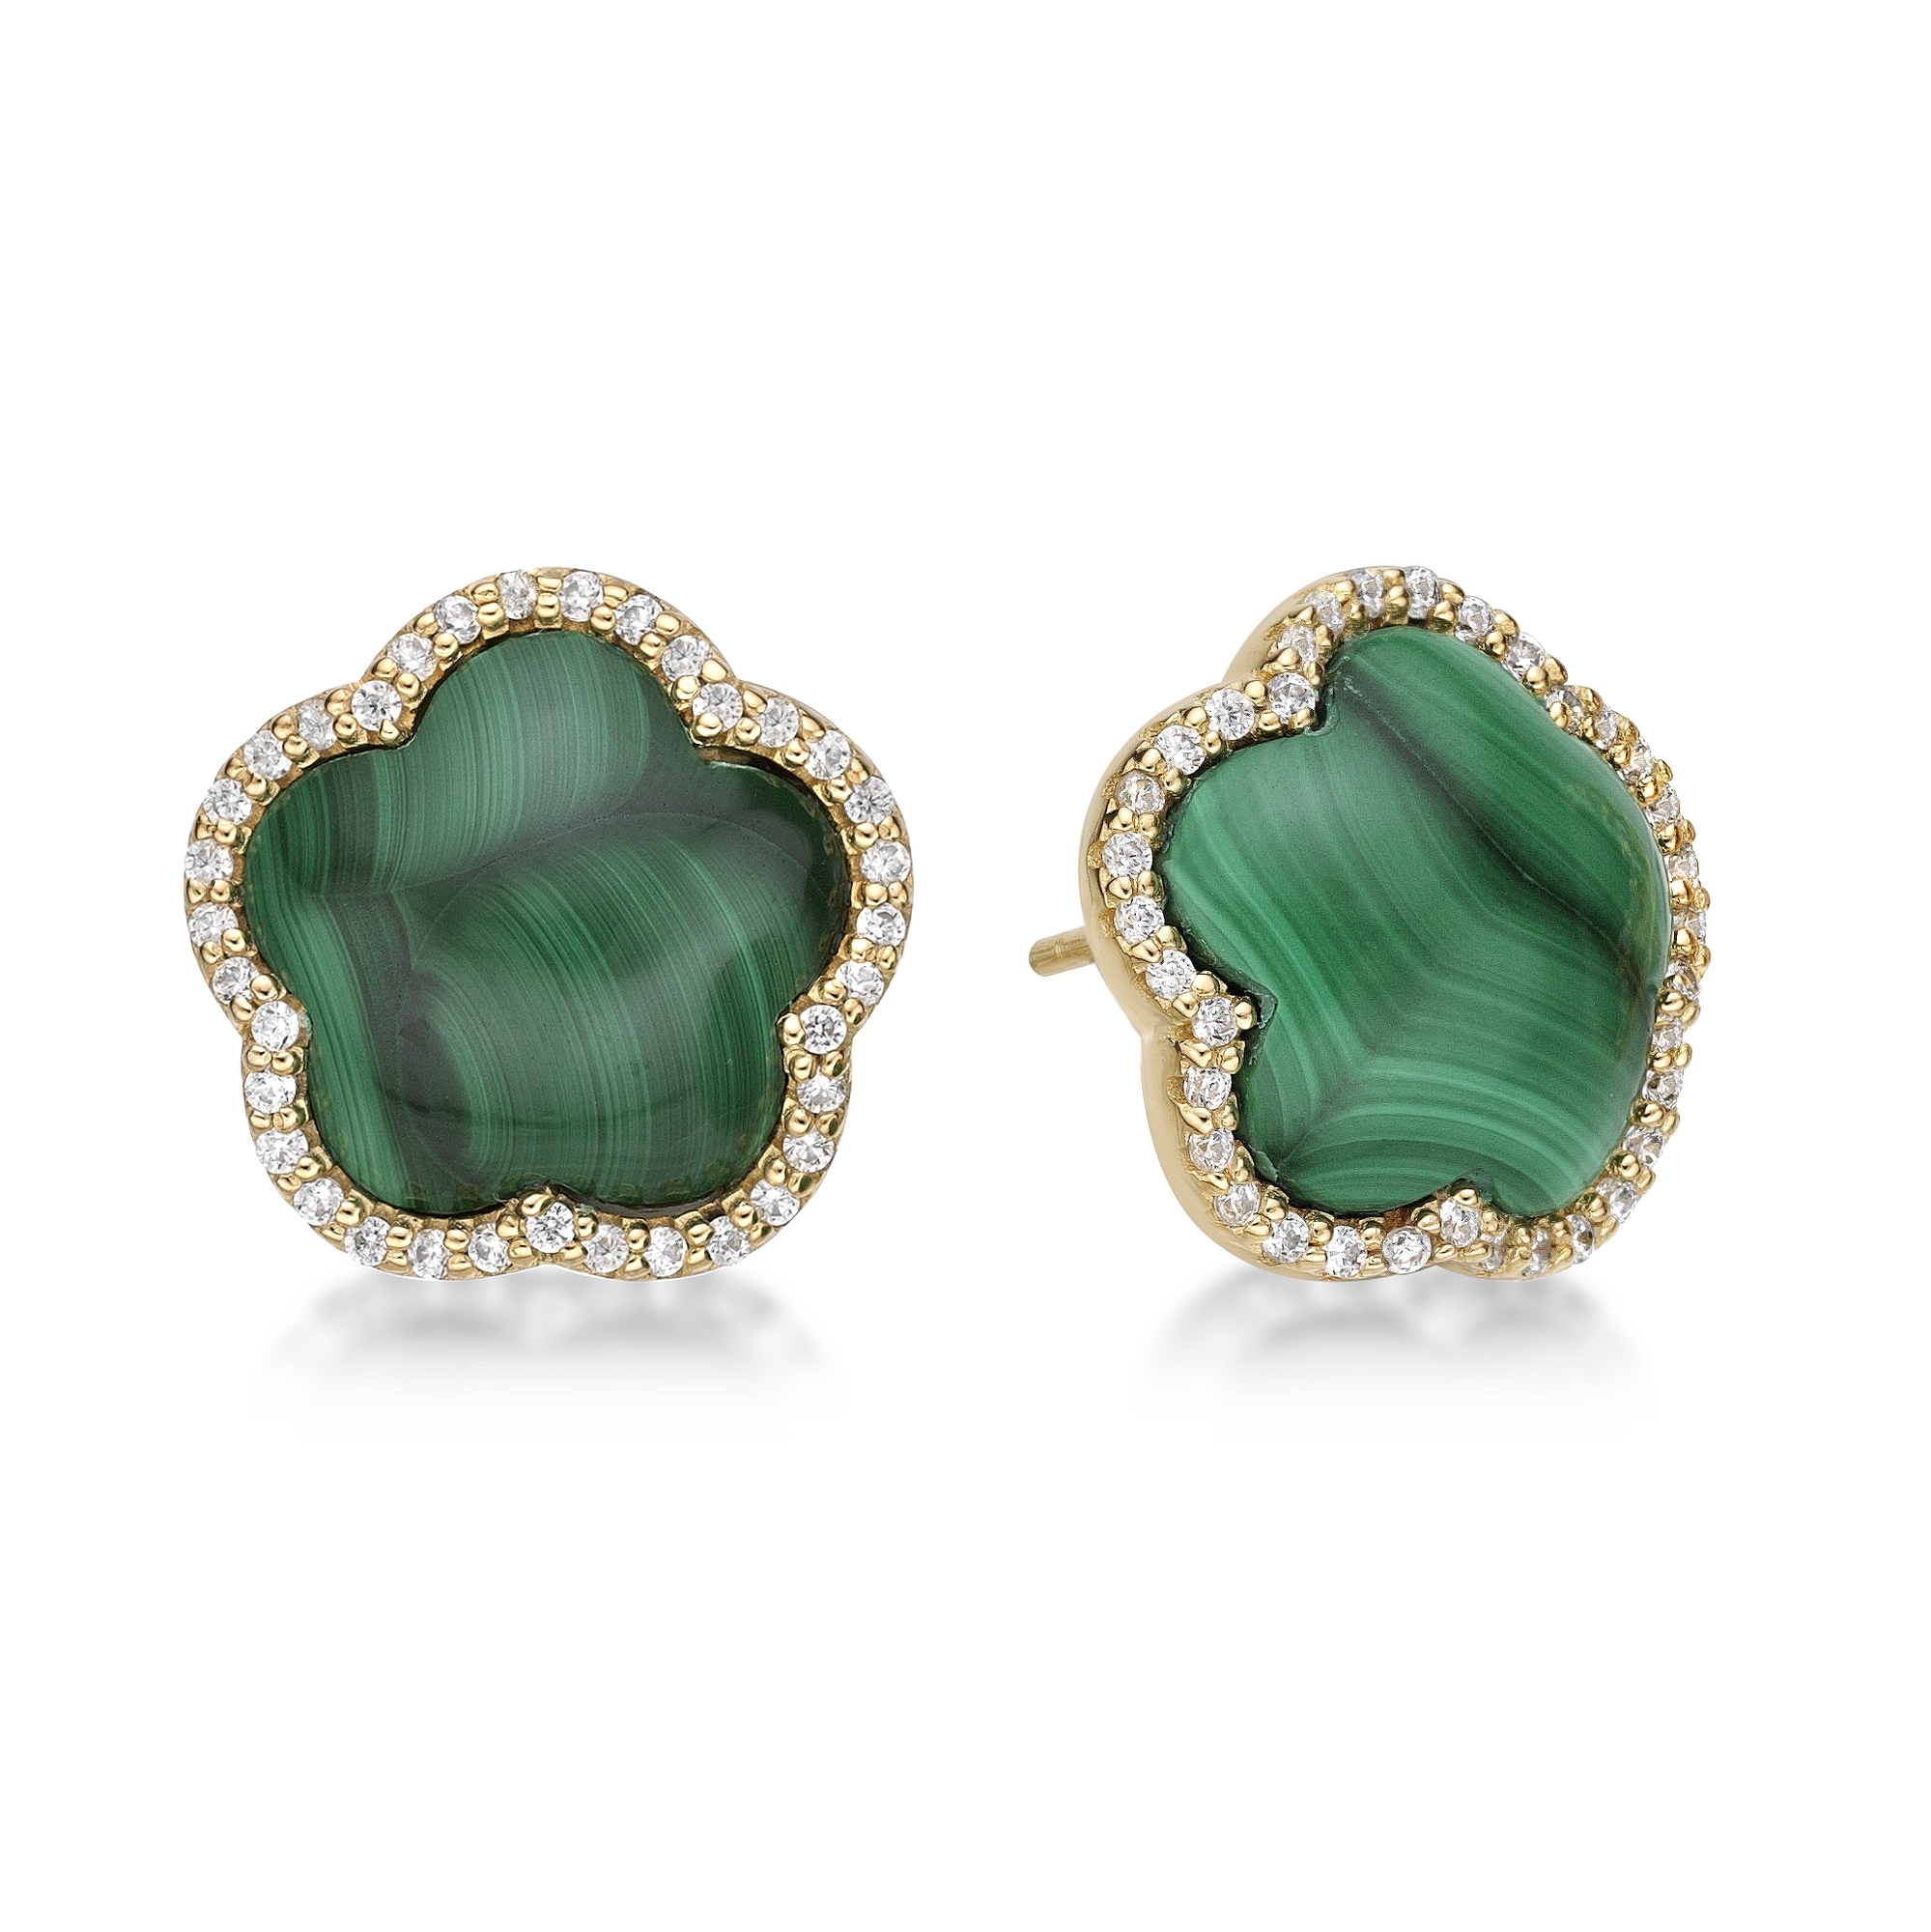 Lavari Jewelers Women’s Malachite Five Petal Flower Stud Earrings with Friction Back and Yellow Gold Plating, 925 Sterling Silver, Cubic Zirconia